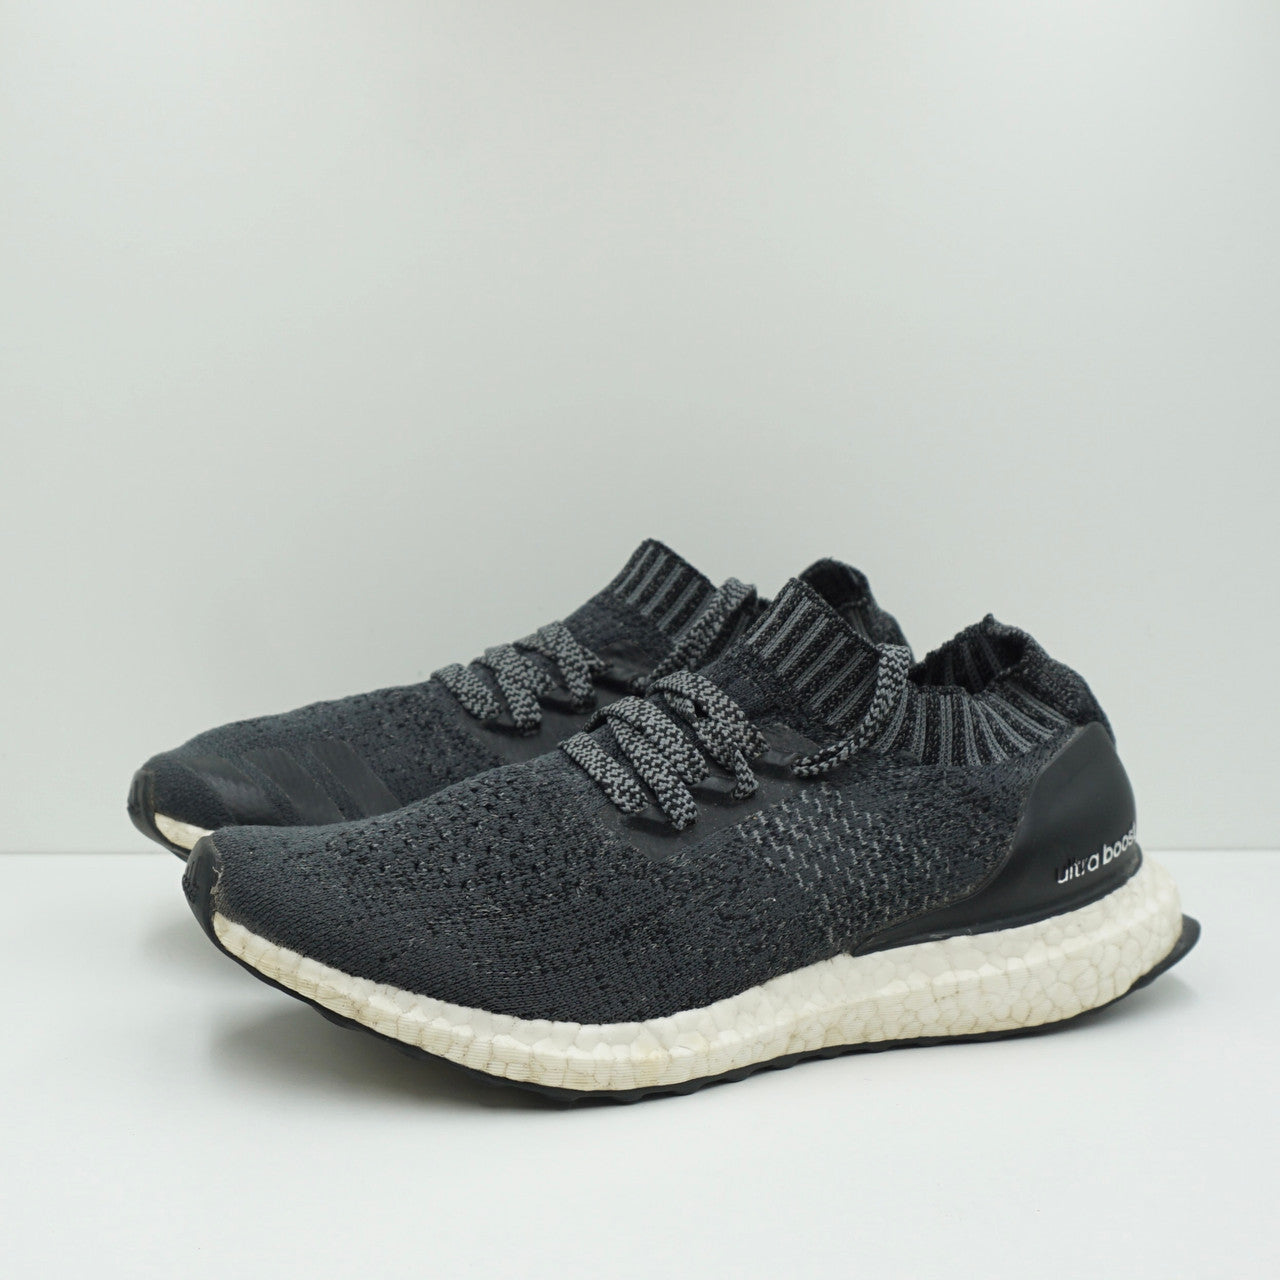 Adidas Ultra Boost Uncaged Carbon Core Black (W)